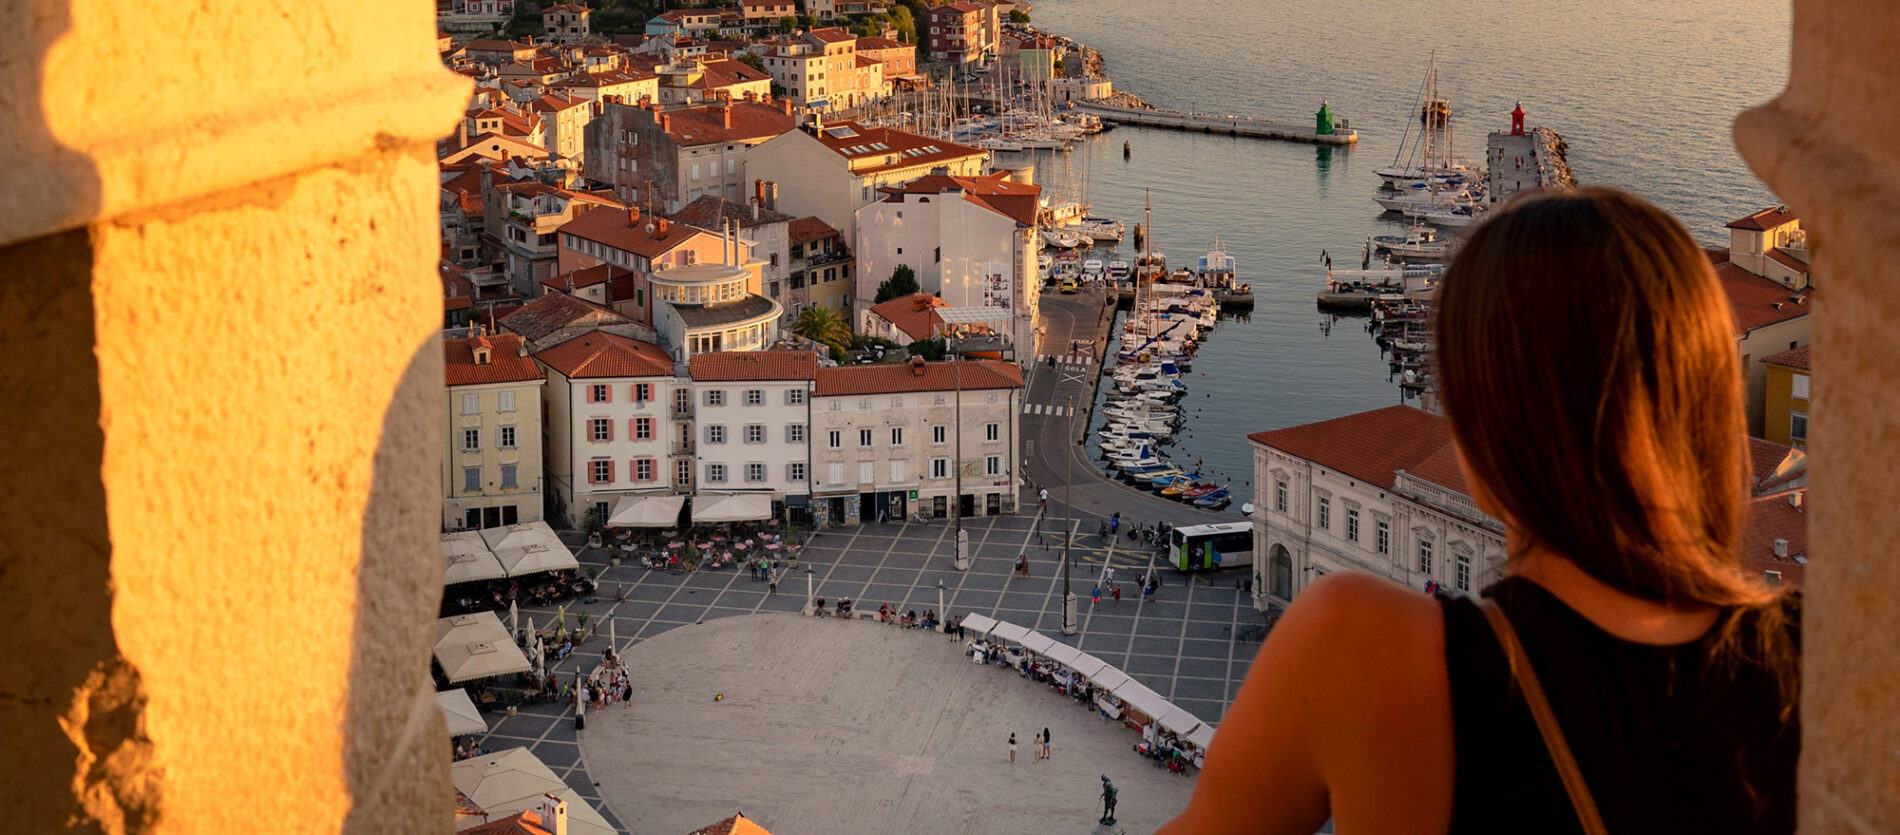 Discover Piran from the heart of the Old Town